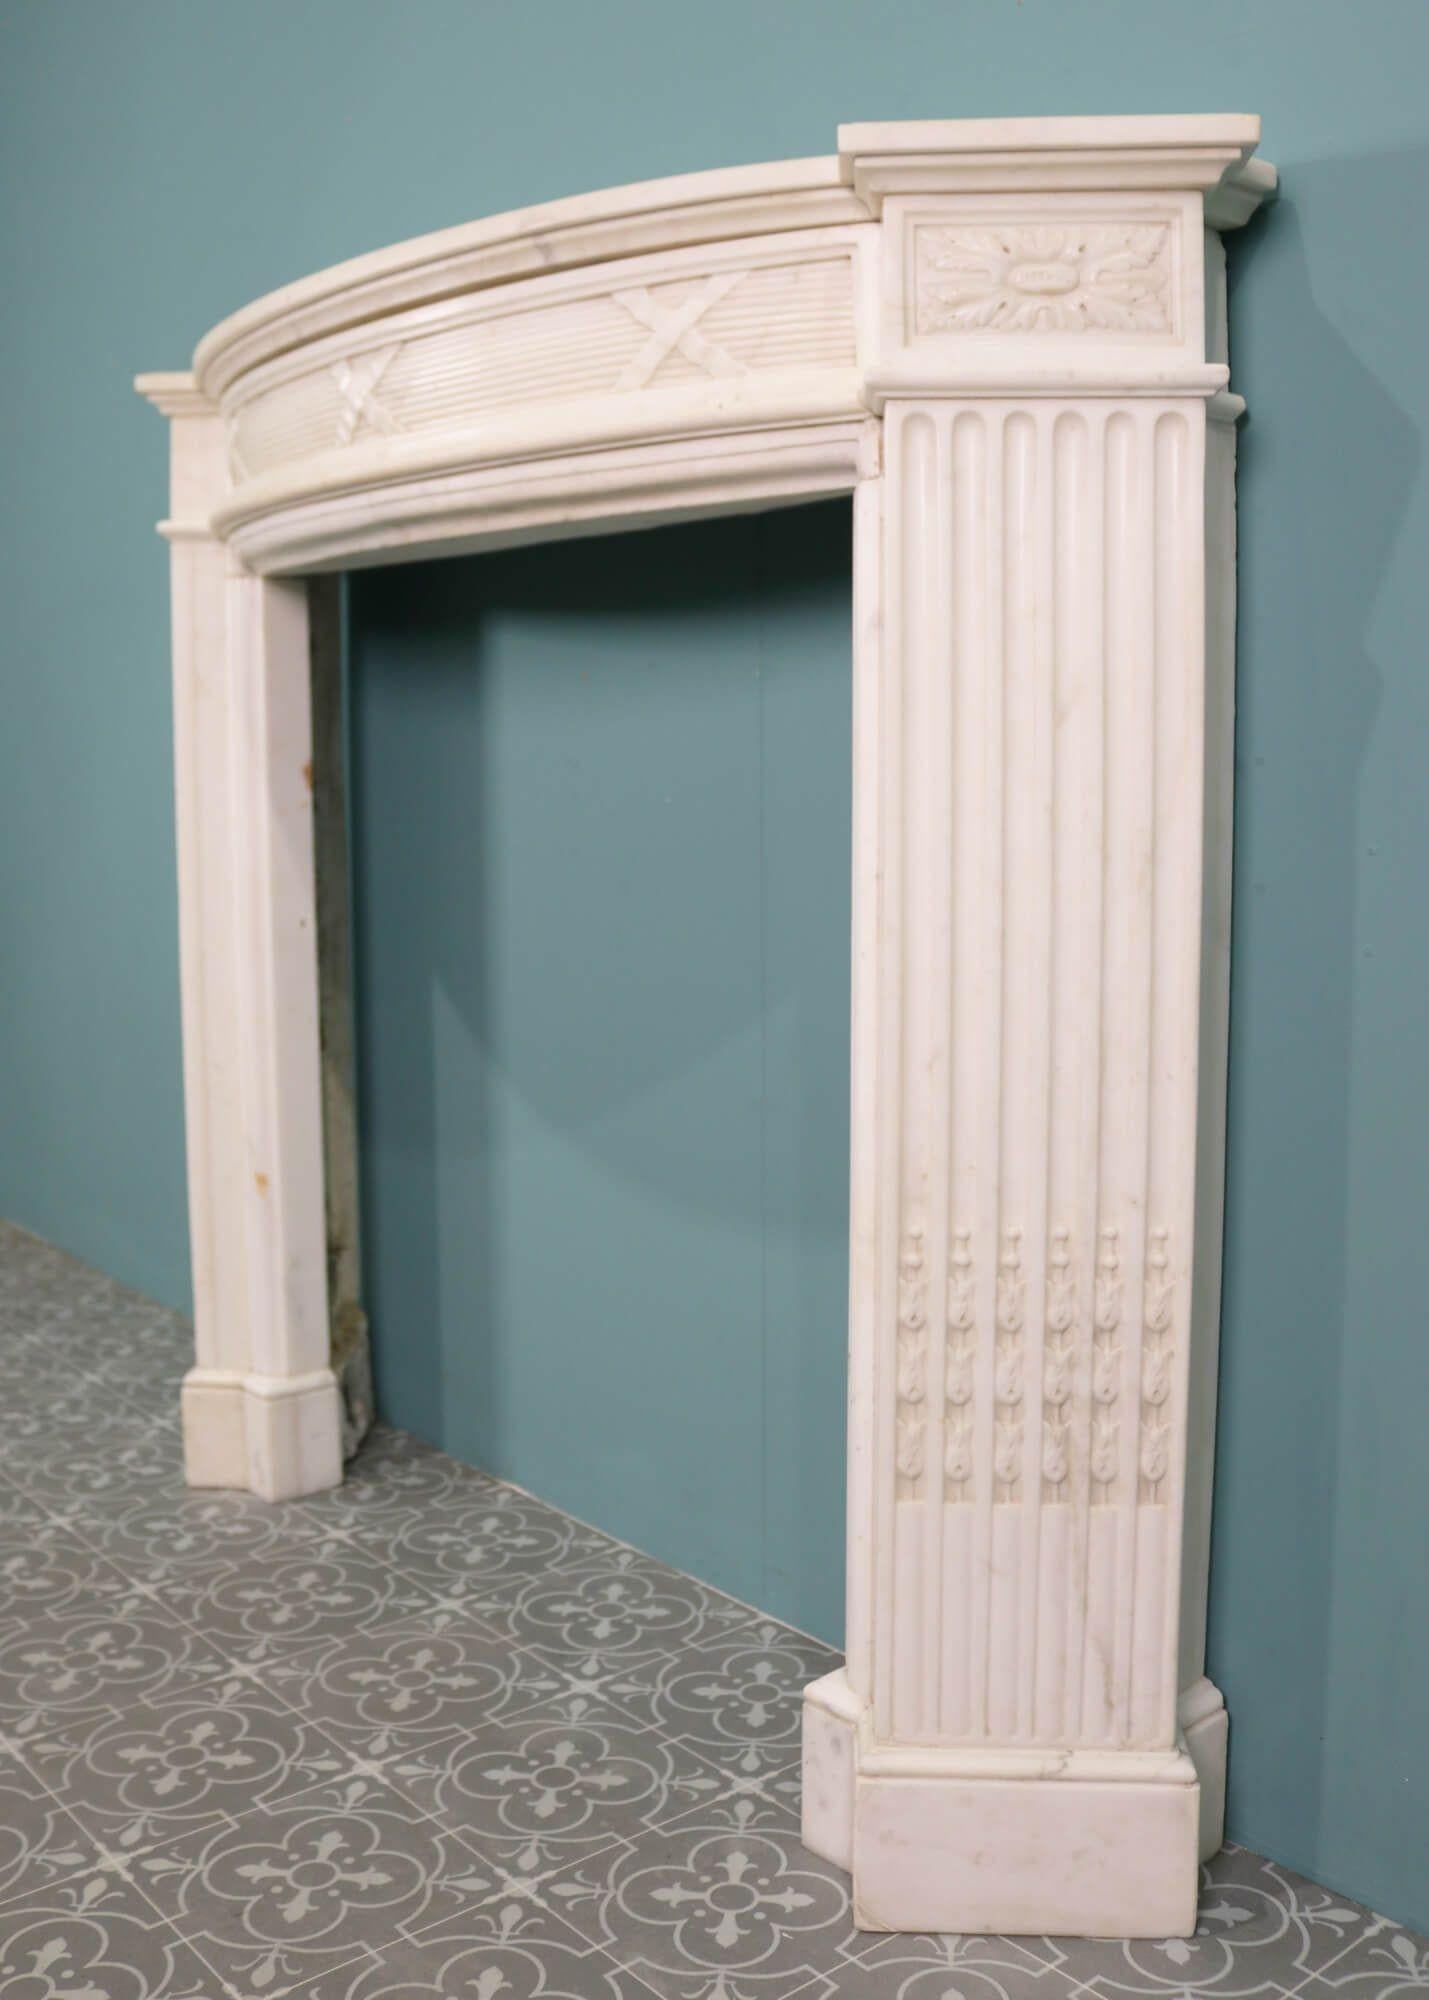 Bowfronted Antique White Marble Fire Mantel In Fair Condition For Sale In Wormelow, Herefordshire